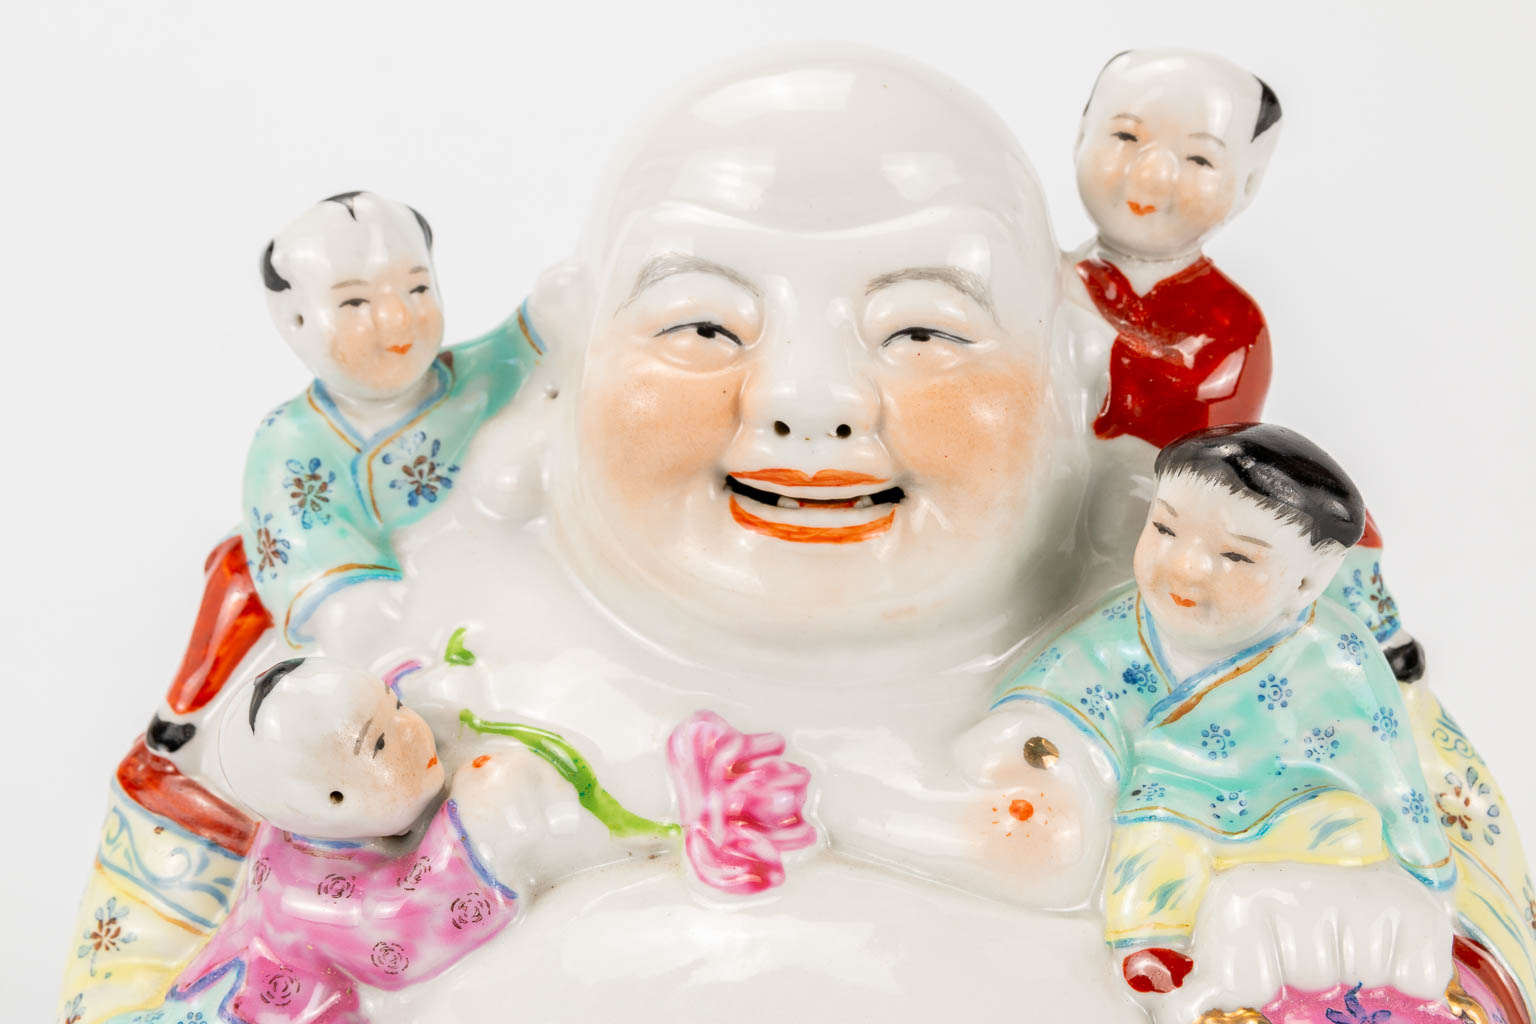 A collection of 2 laughing buddha's made of Chinese porcelain. 19th/20th century. (11 x 20 x 22 cm) - Image 15 of 19